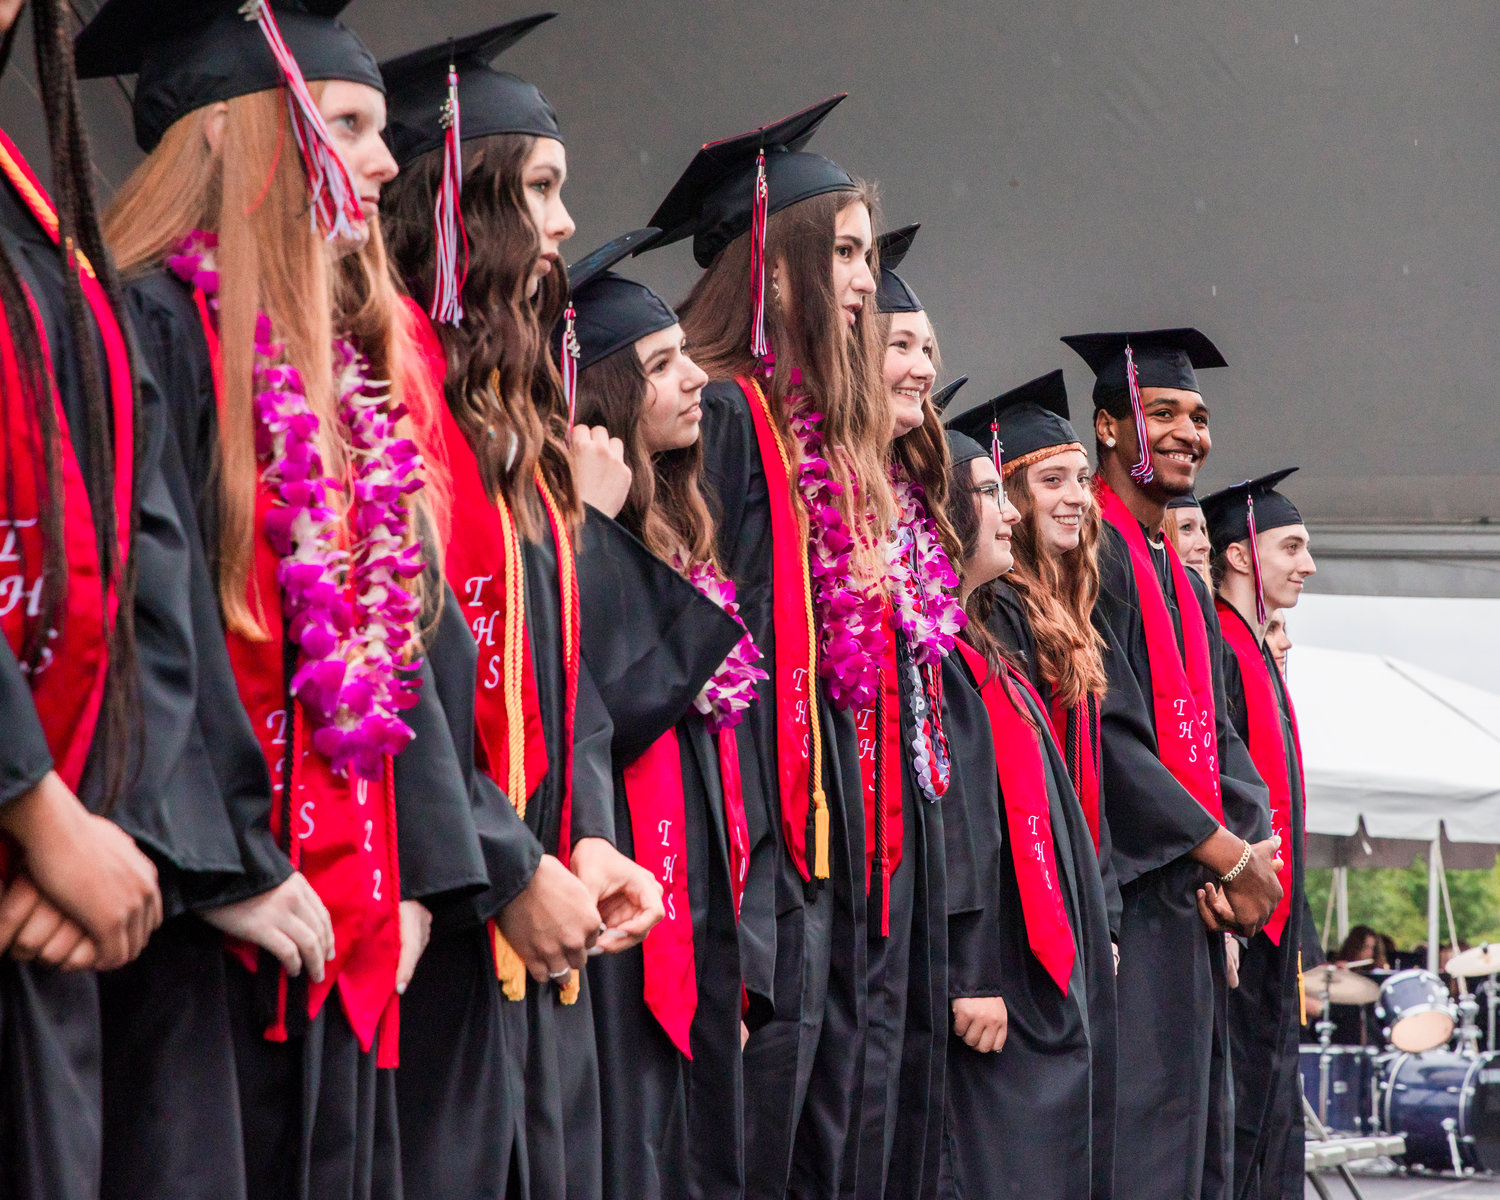 Graduates smile at the crowd during a graduation ceremony in Tenino.